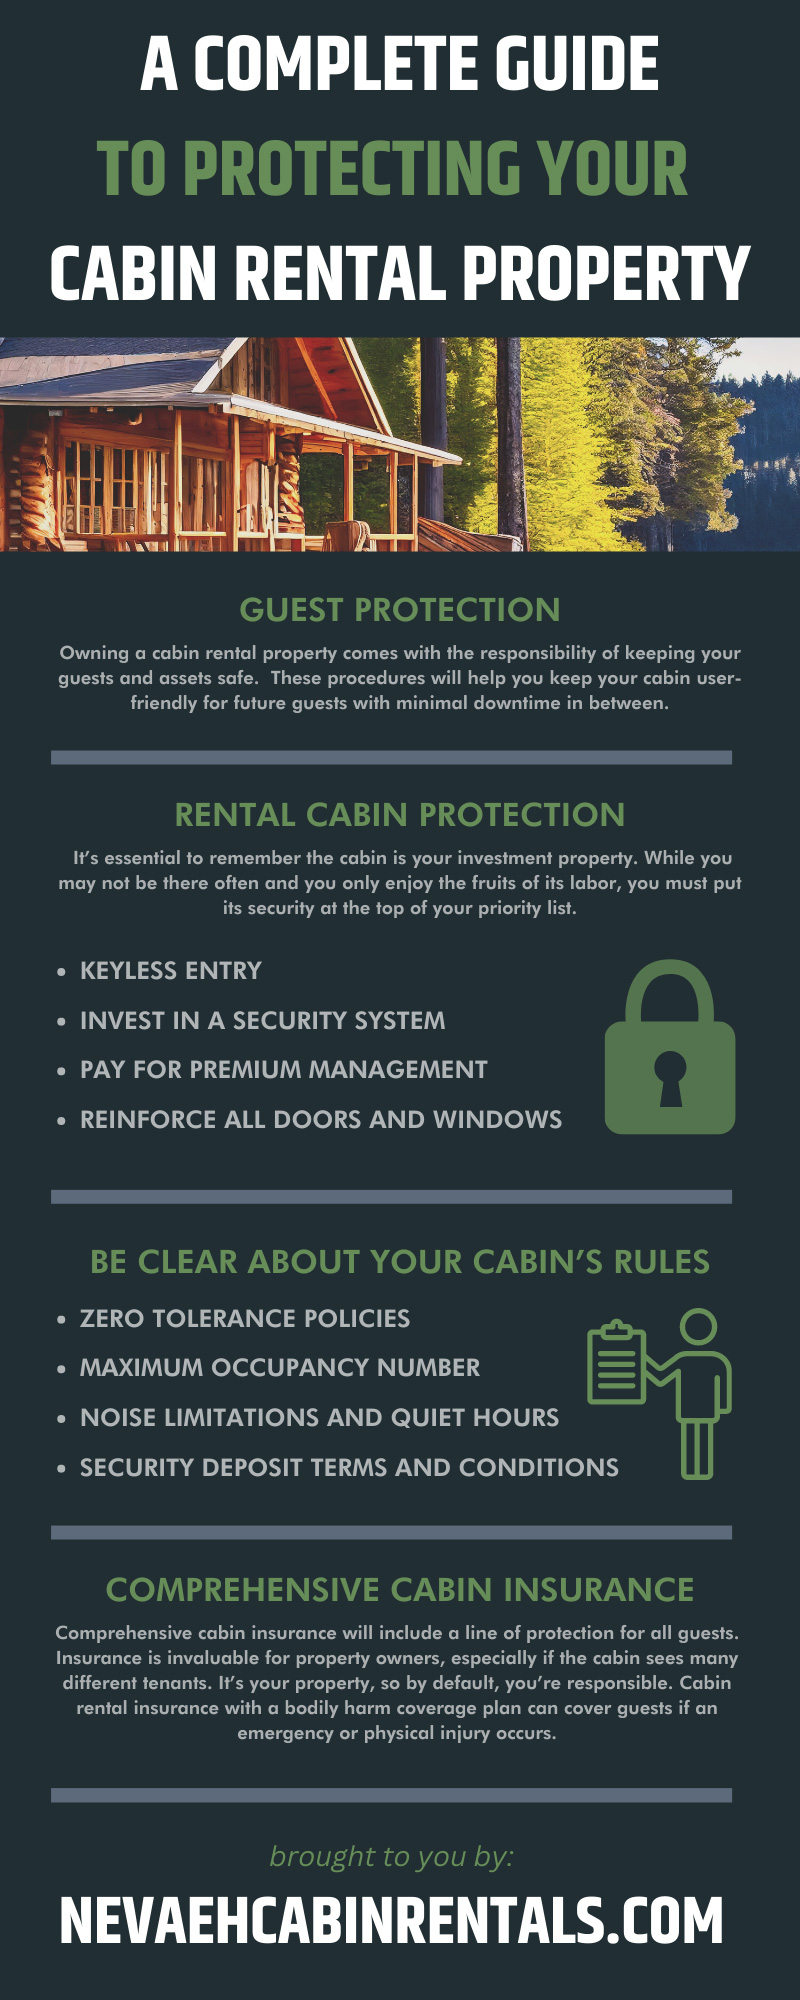 A Complete Guide to Protecting Your Cabin Rental Property